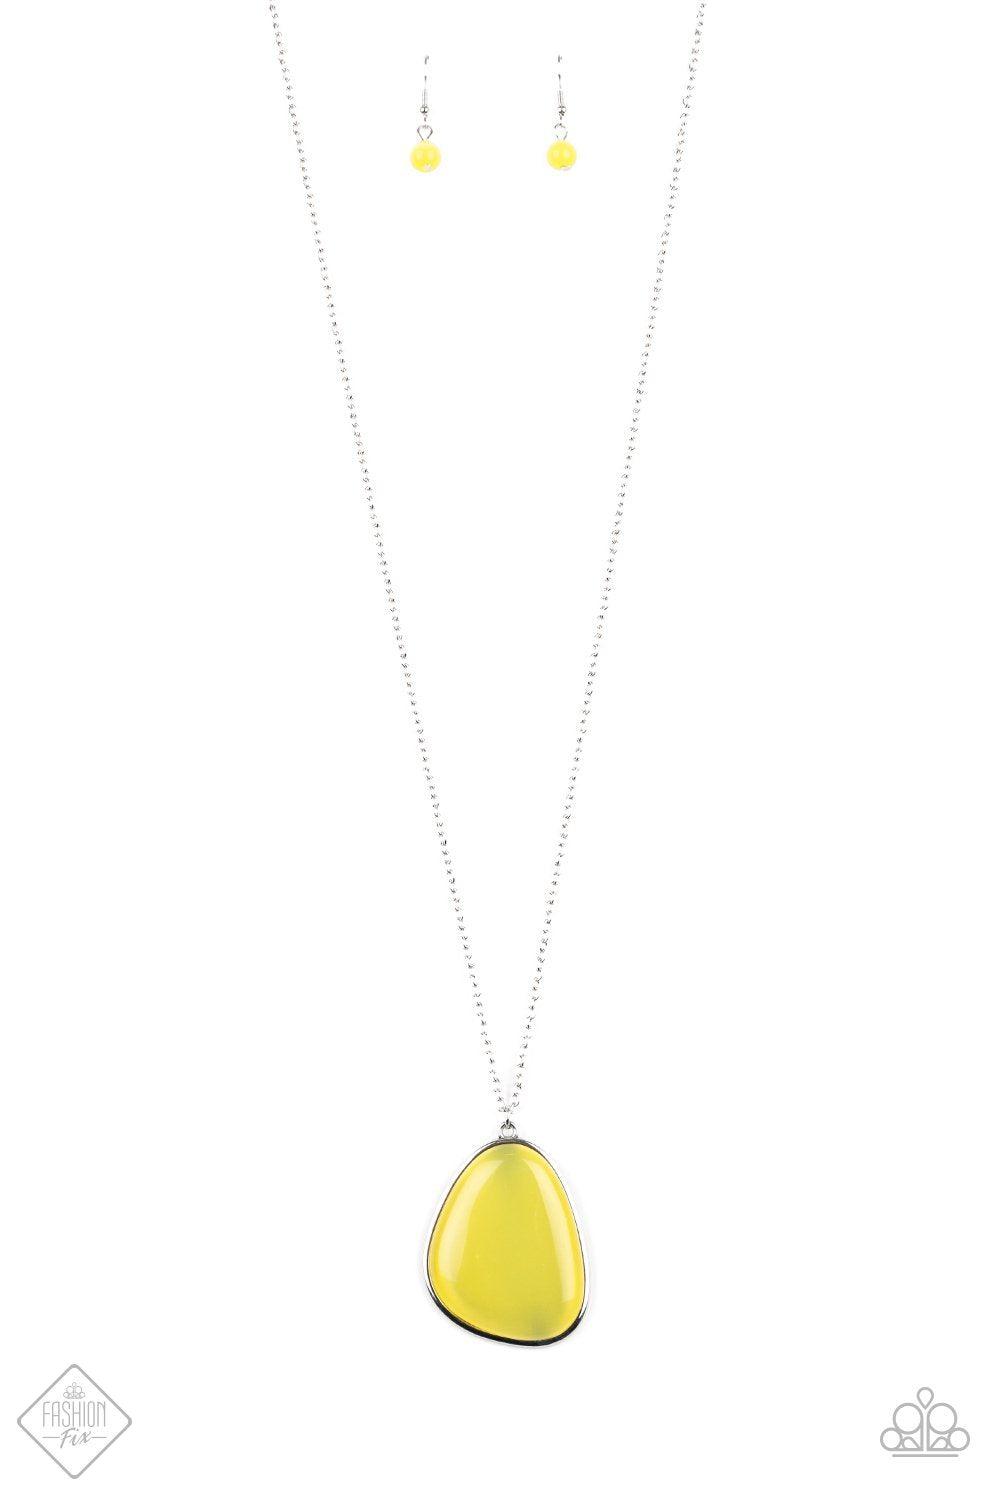 Inner Tranquility - Yellow Teardrop Stone Silver Necklace - Paparazzi |  Sugar Bee Bling - Paparazzi Jewelry and Accessories